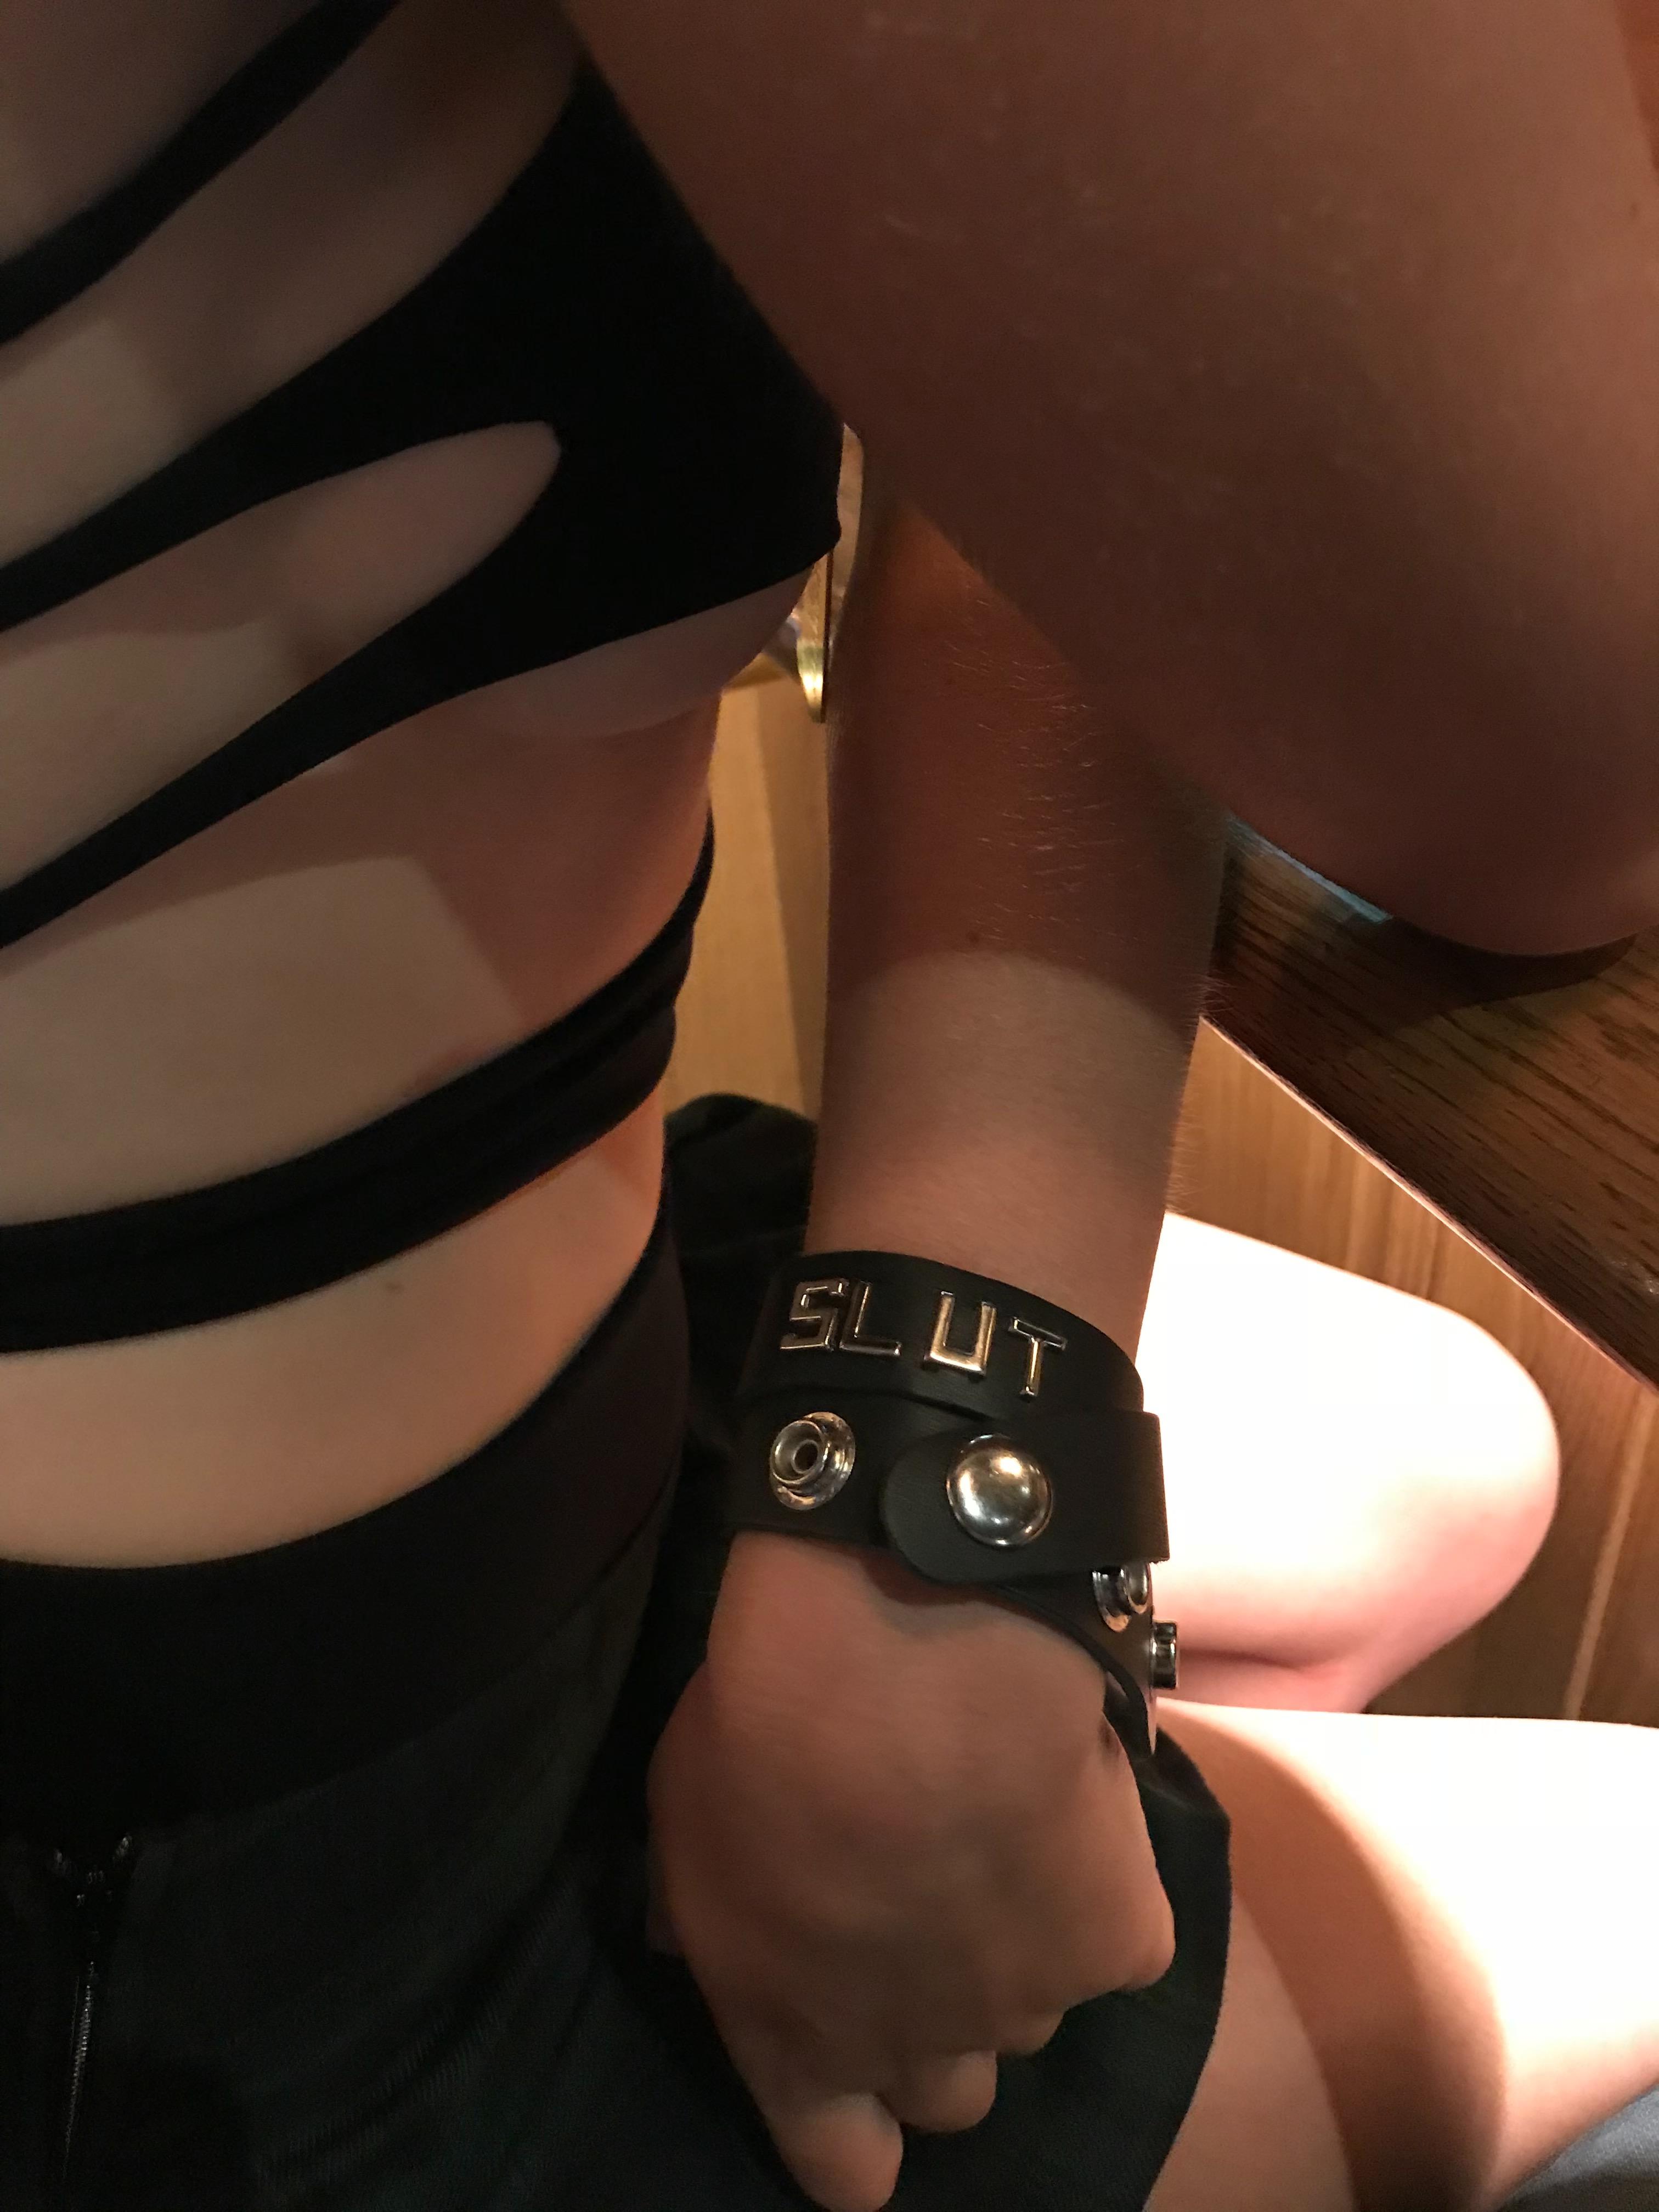 Waiting [f]or my drink at the bar